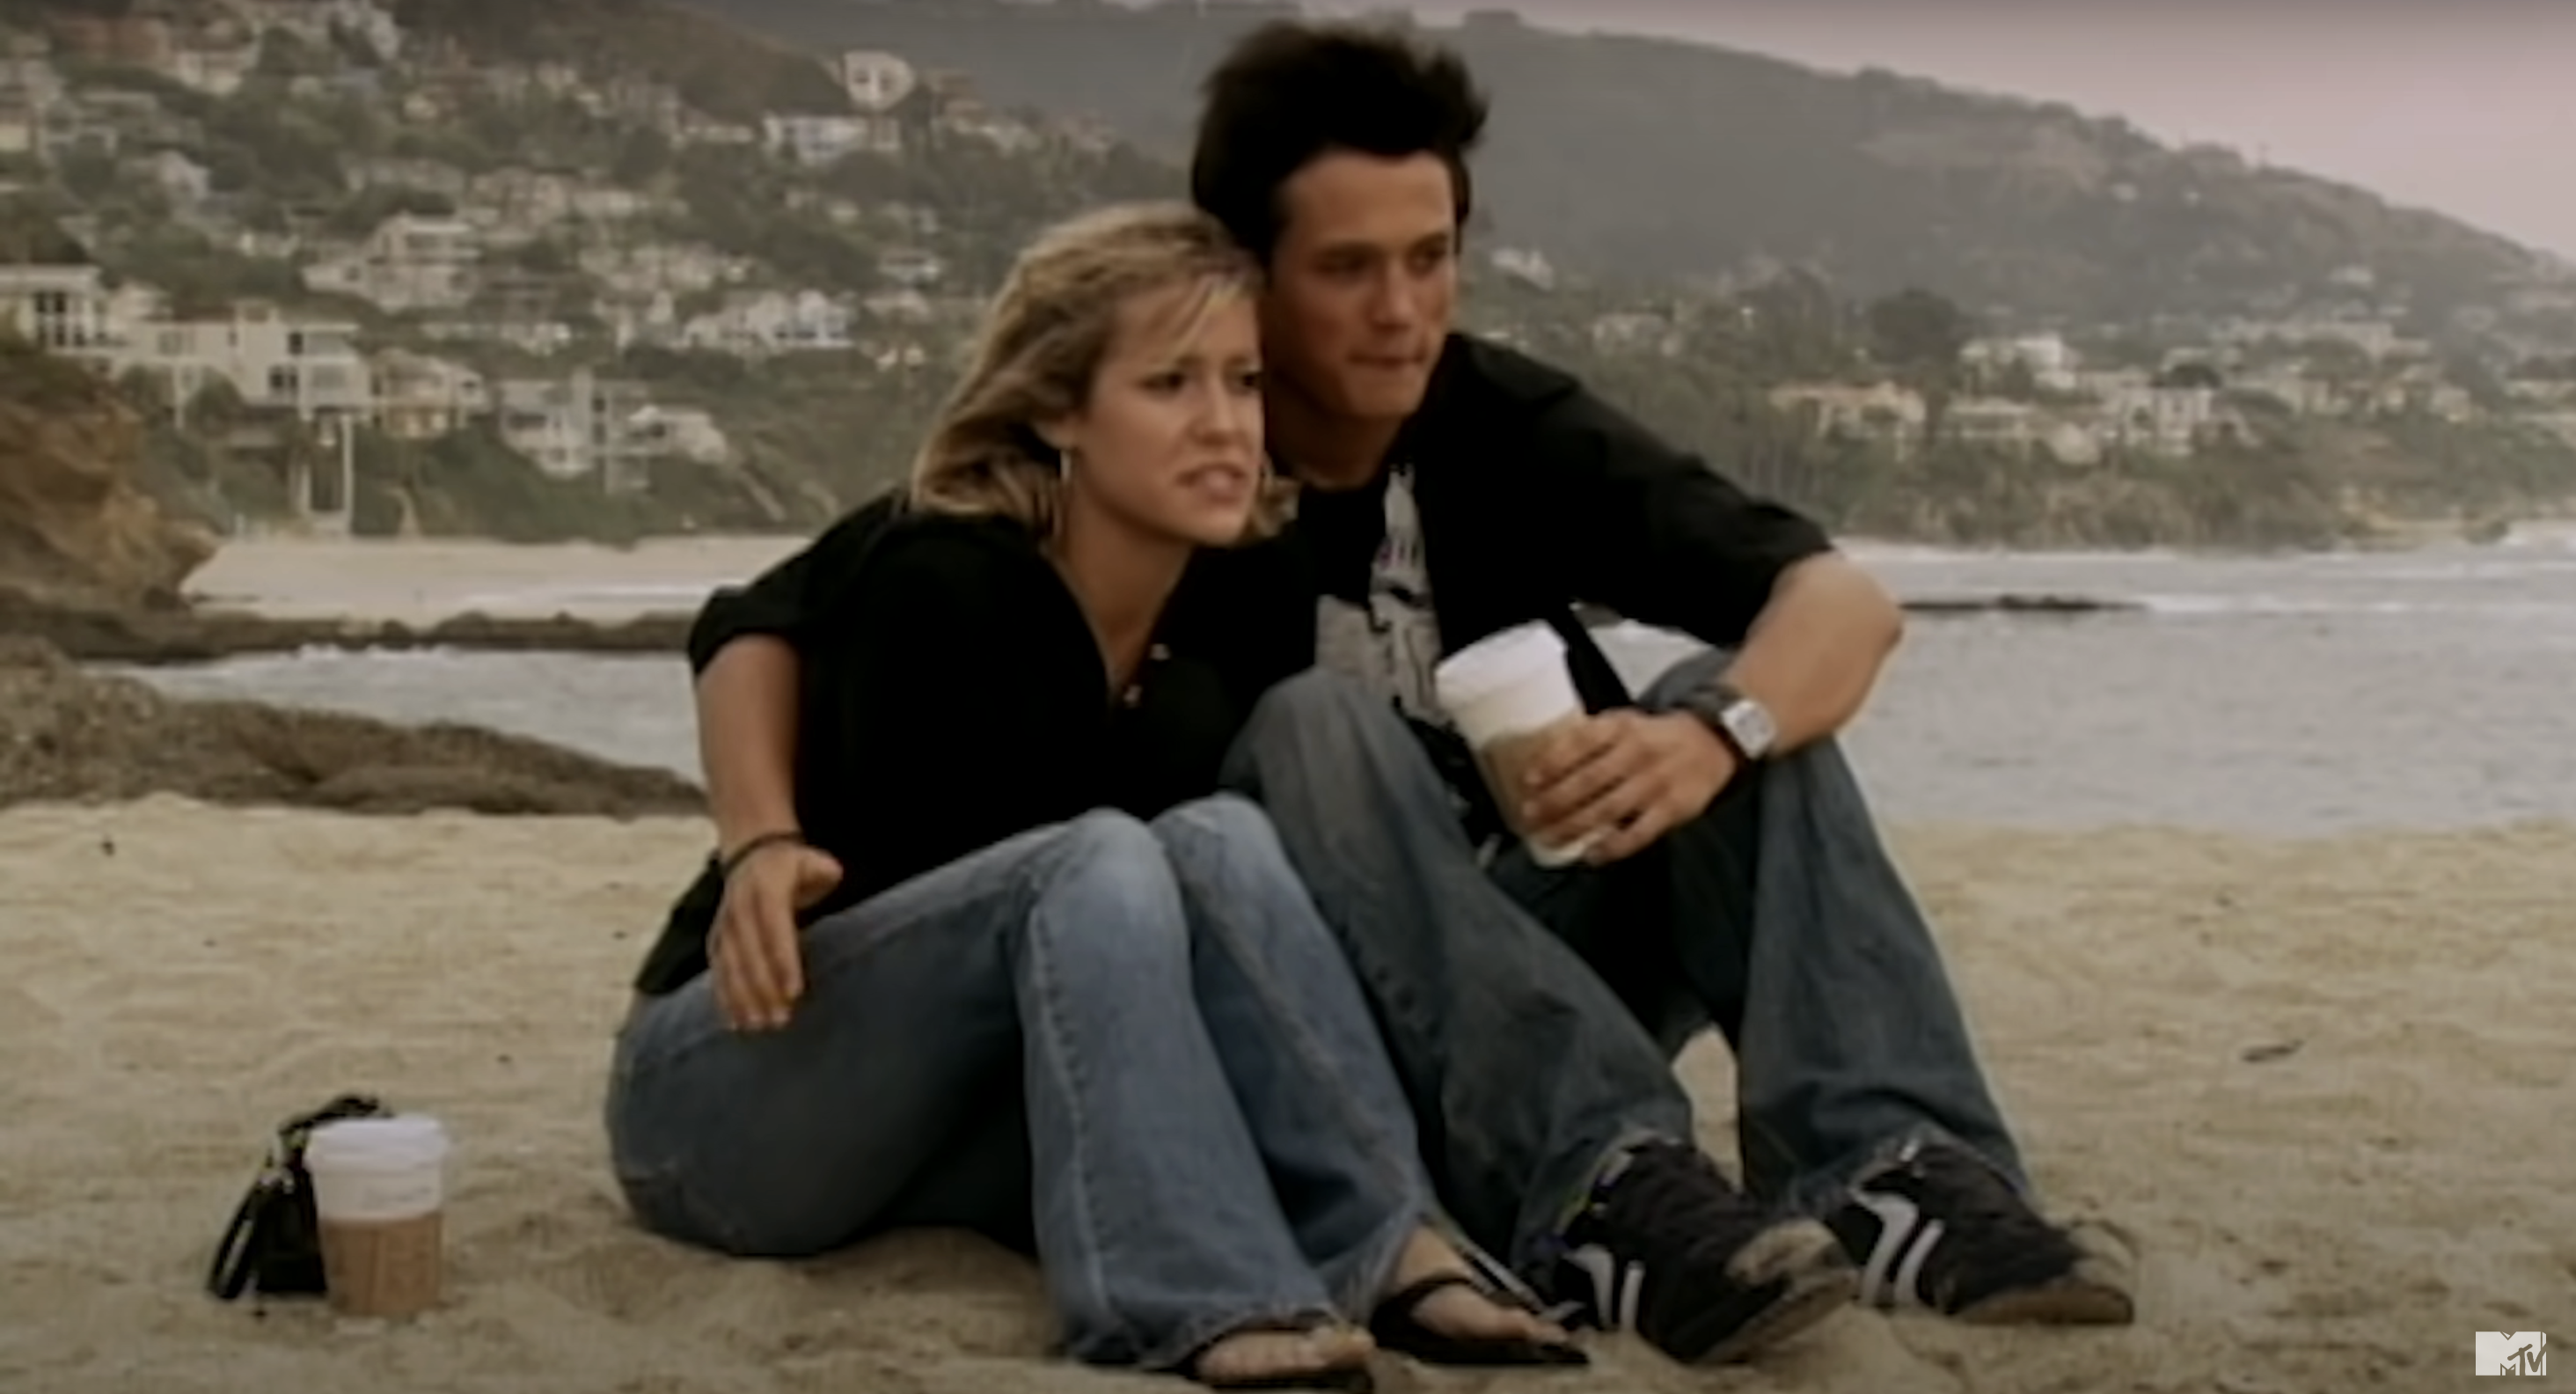 Stephen and Kristin sit closely together on a beach, gazing into the distance, dressed in casual attire